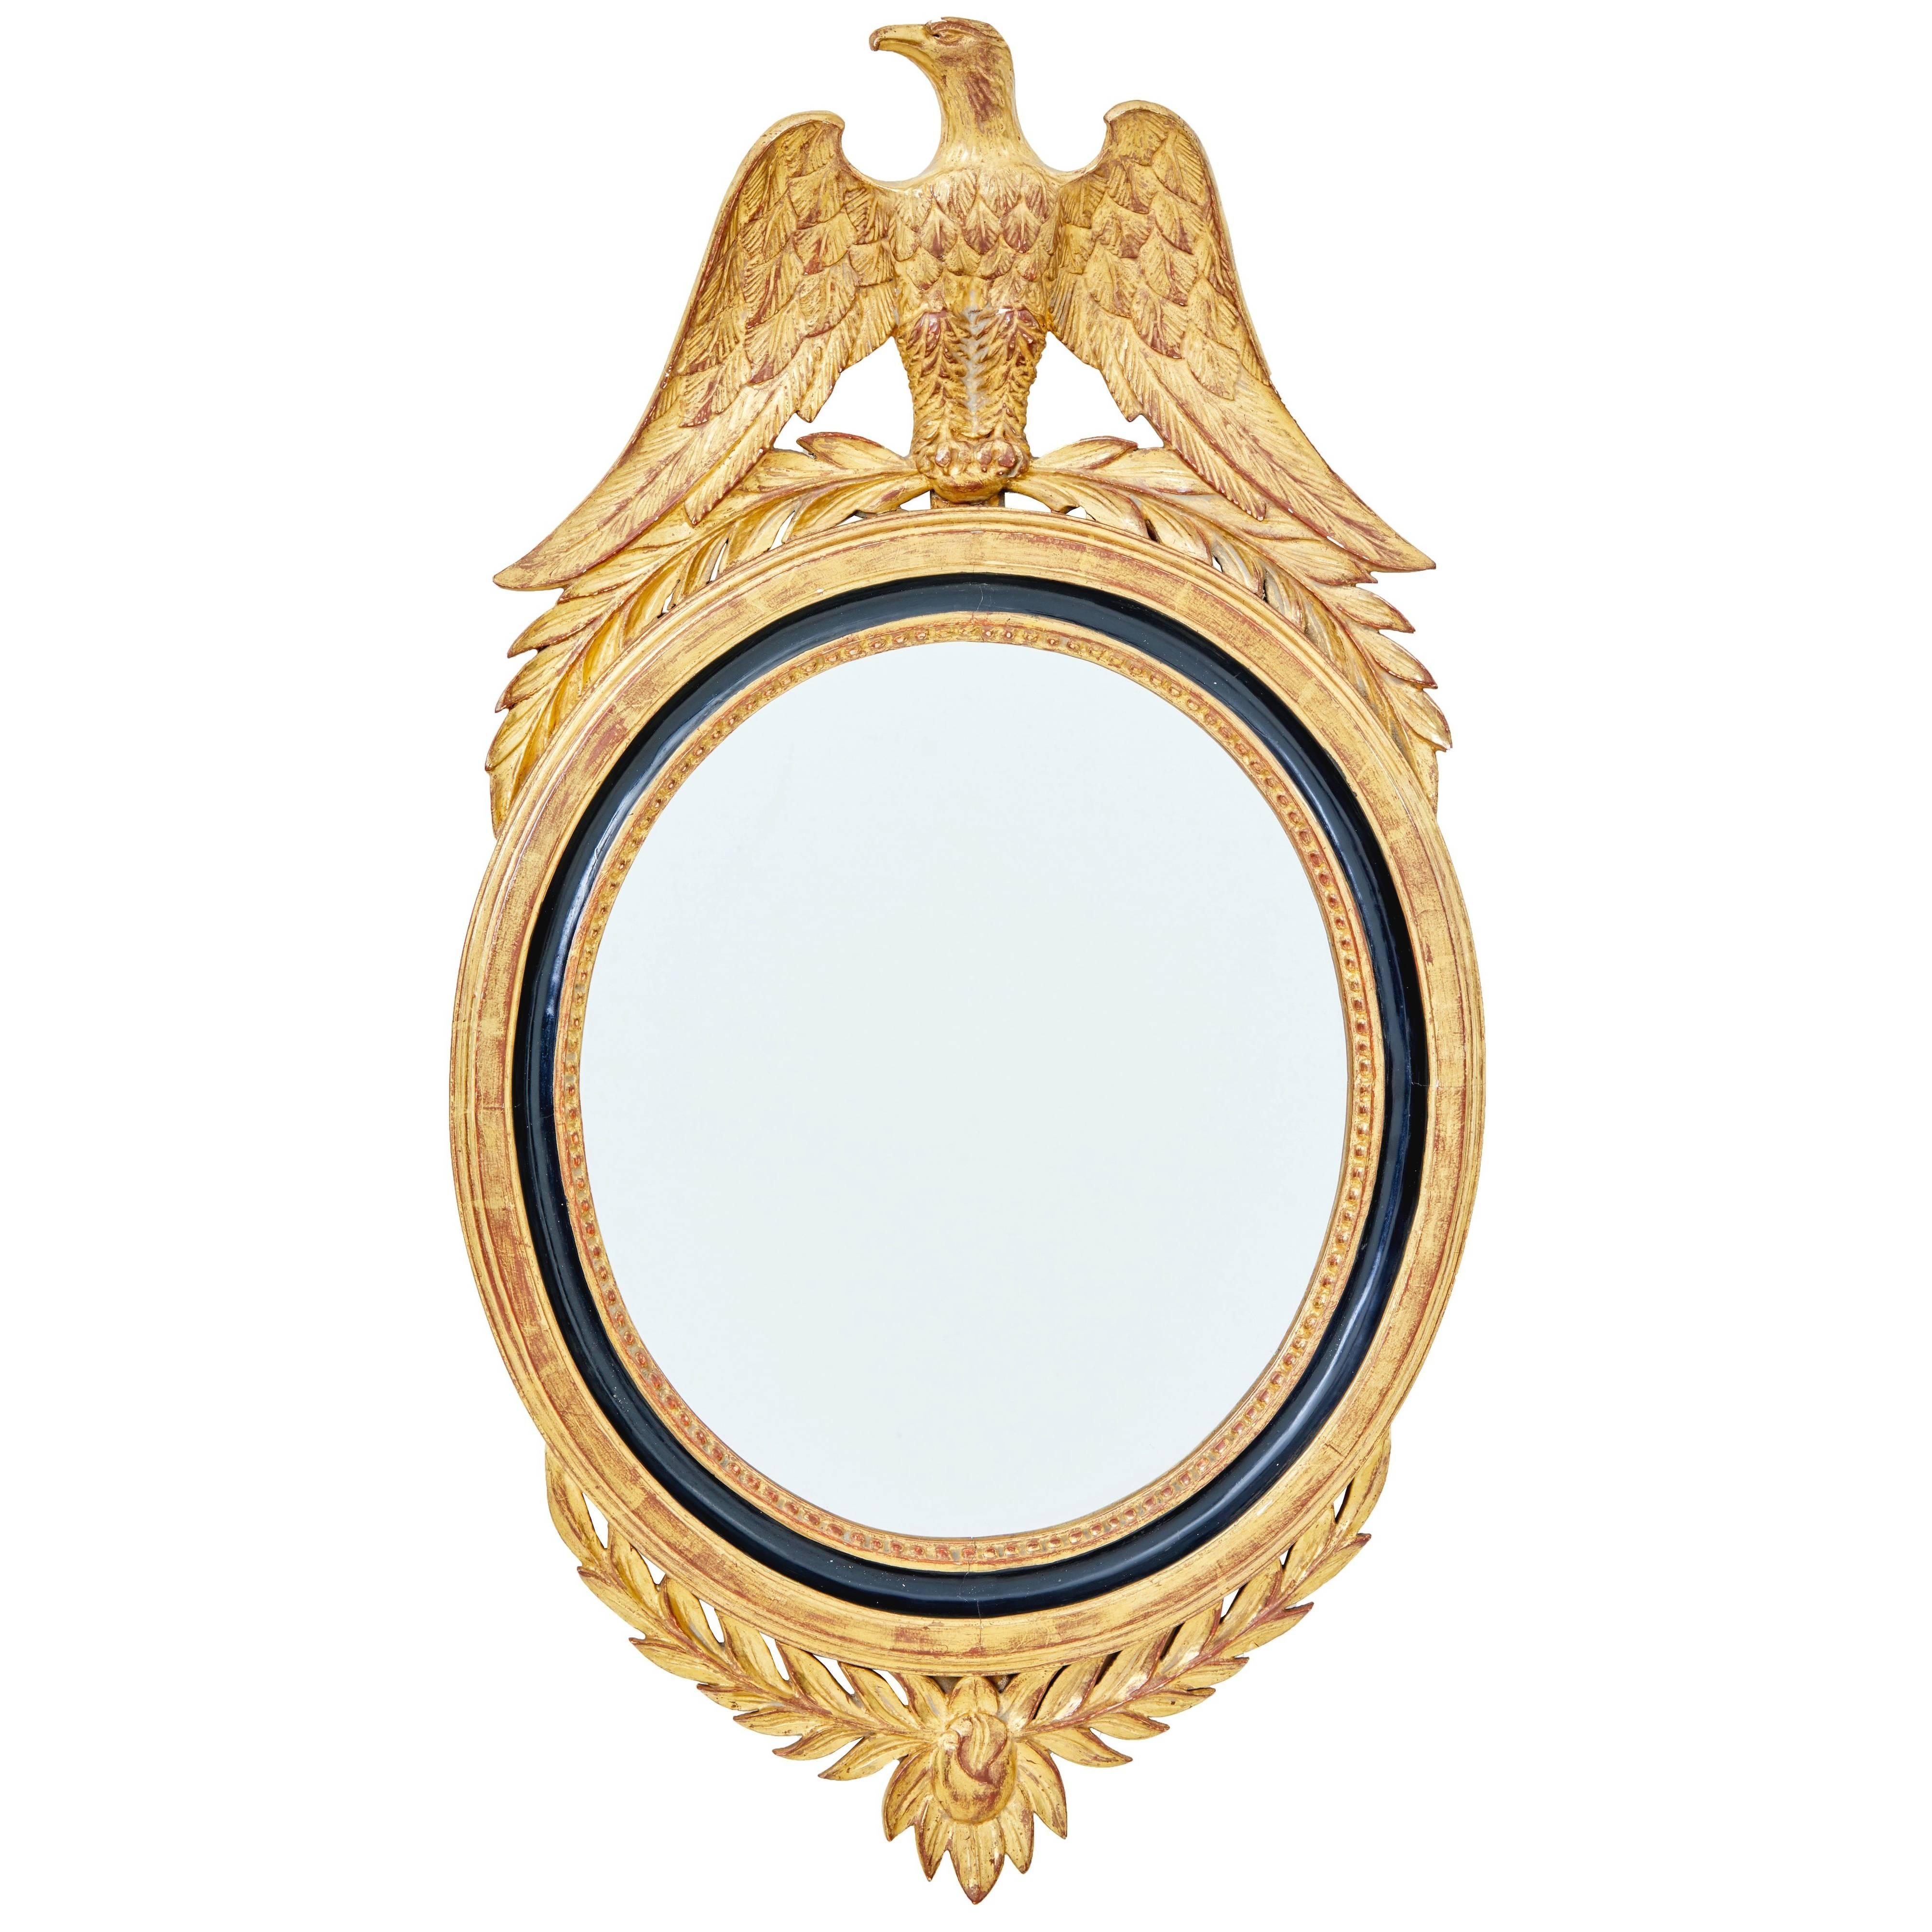 Early 20th Century French Gilt Oval Mirror